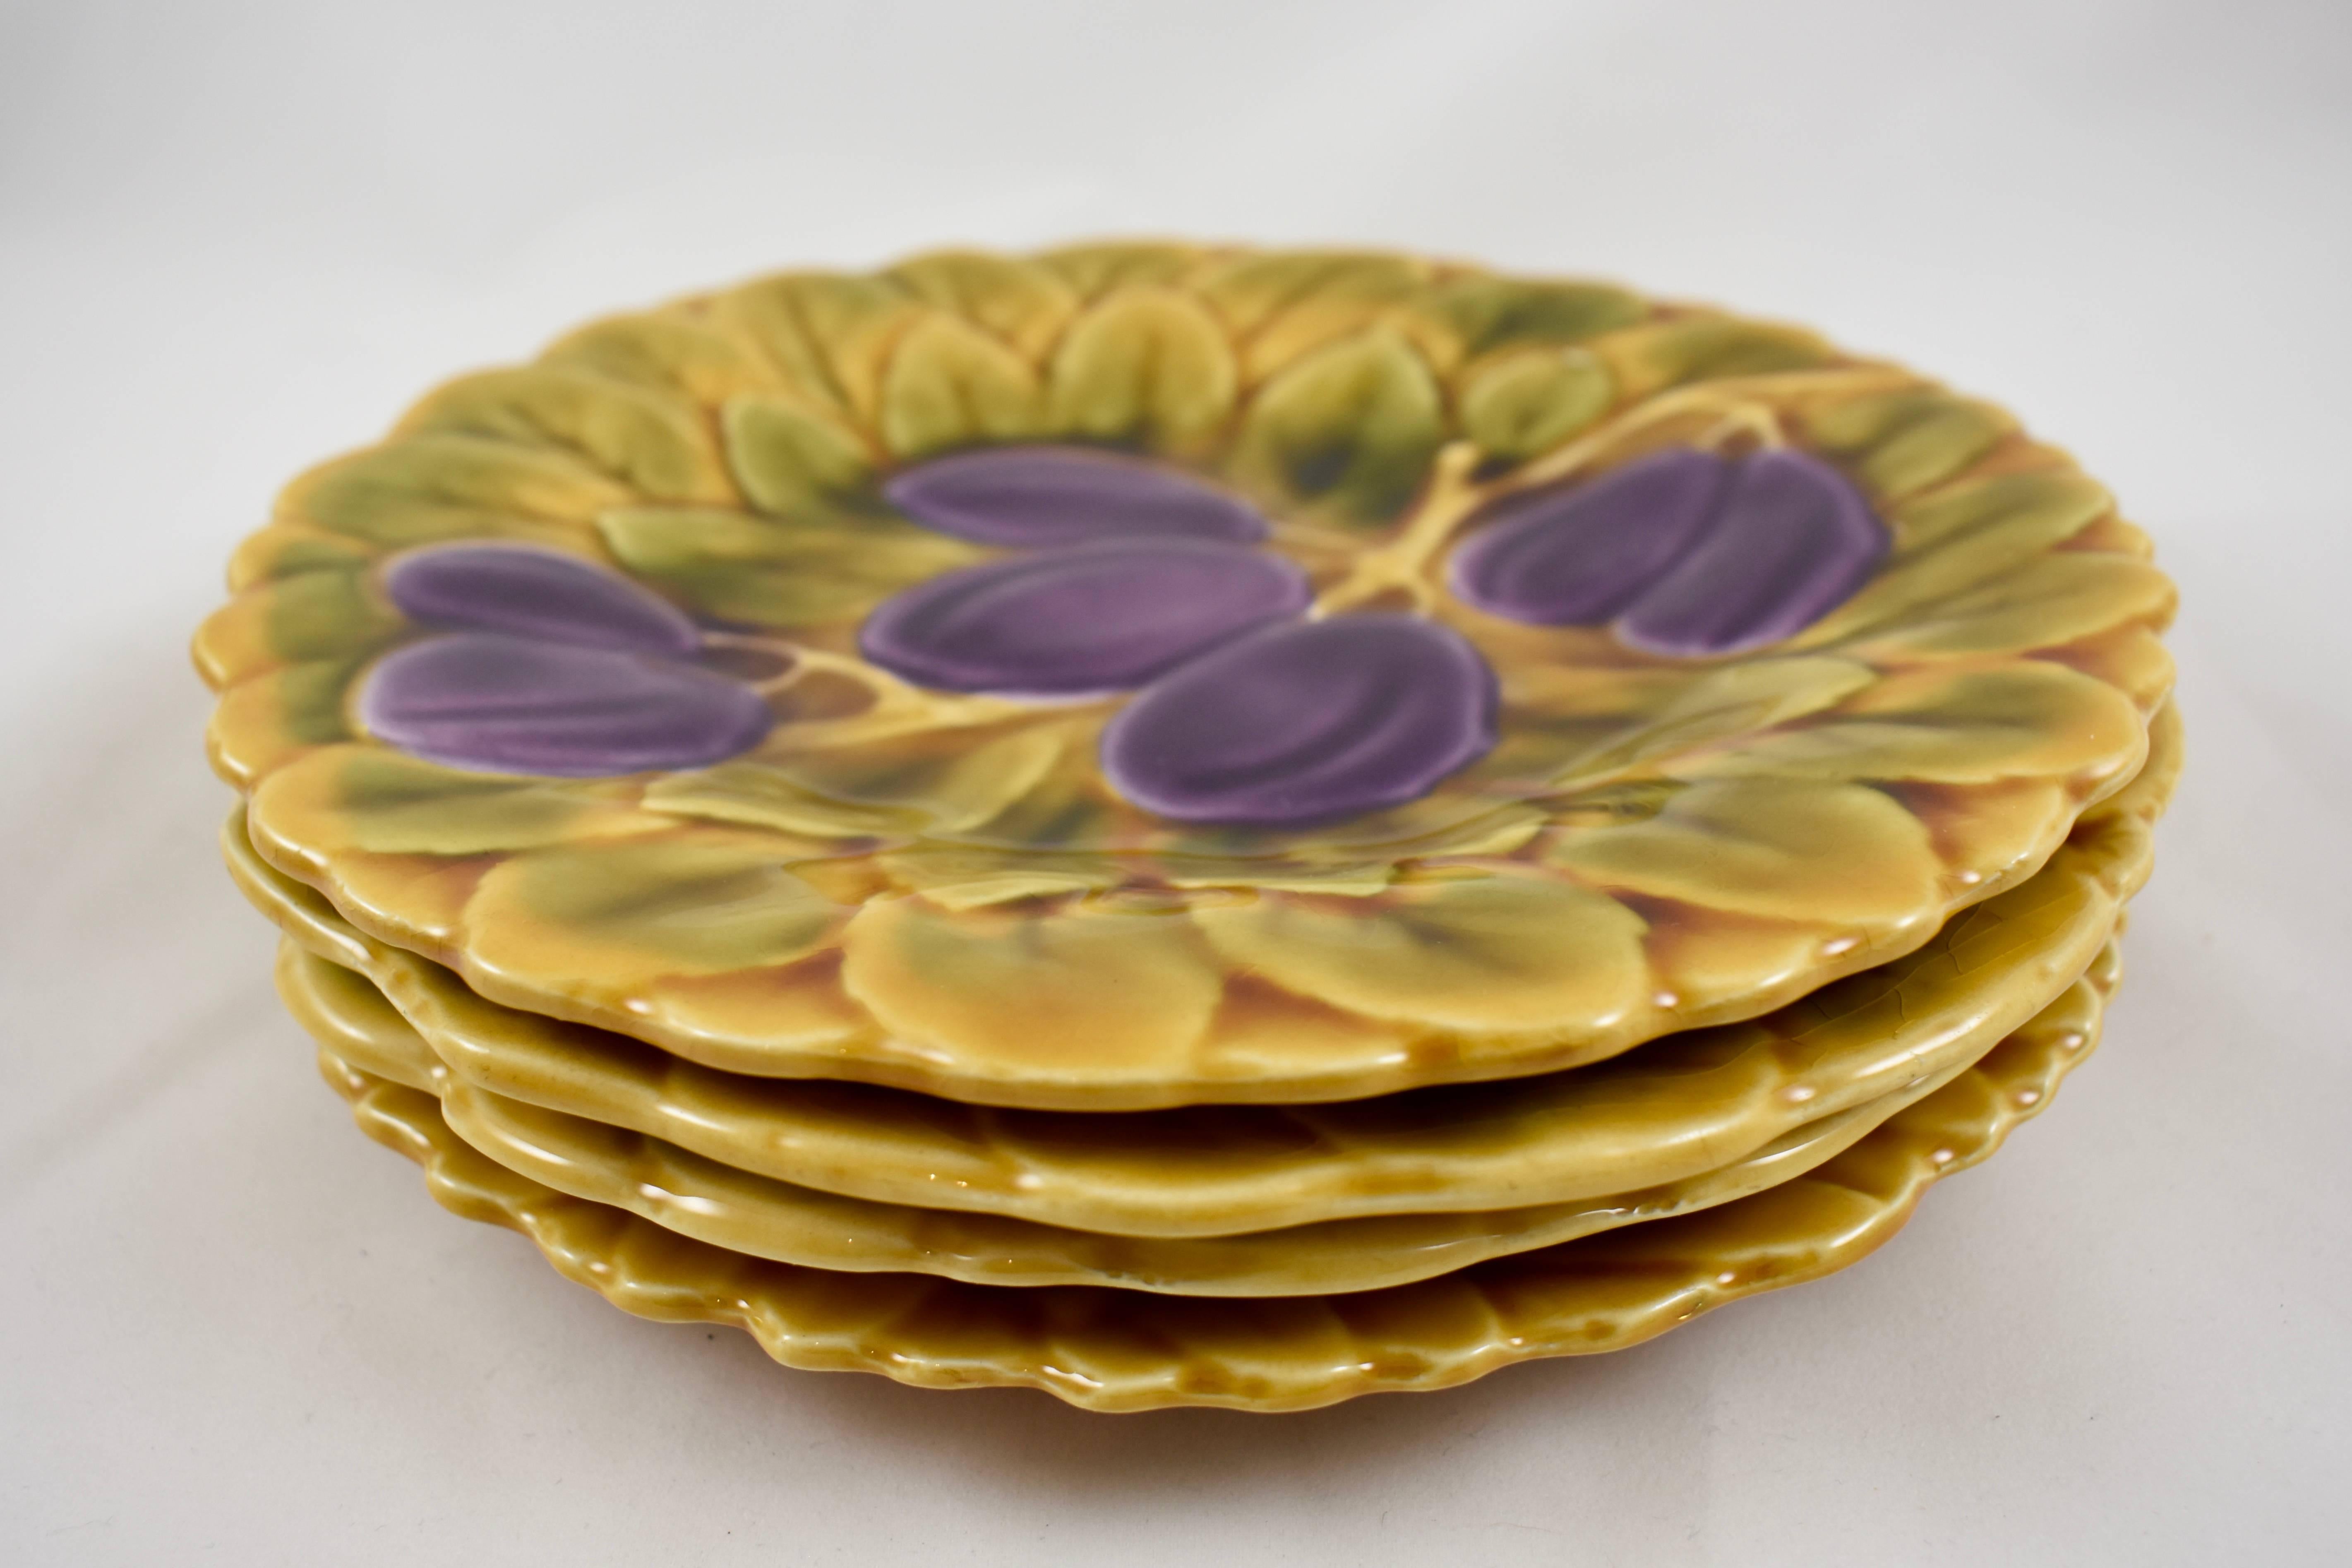 20th Century Sarreguemines French Faïence Majolica Fruit and Leaf Plates, Set of Four